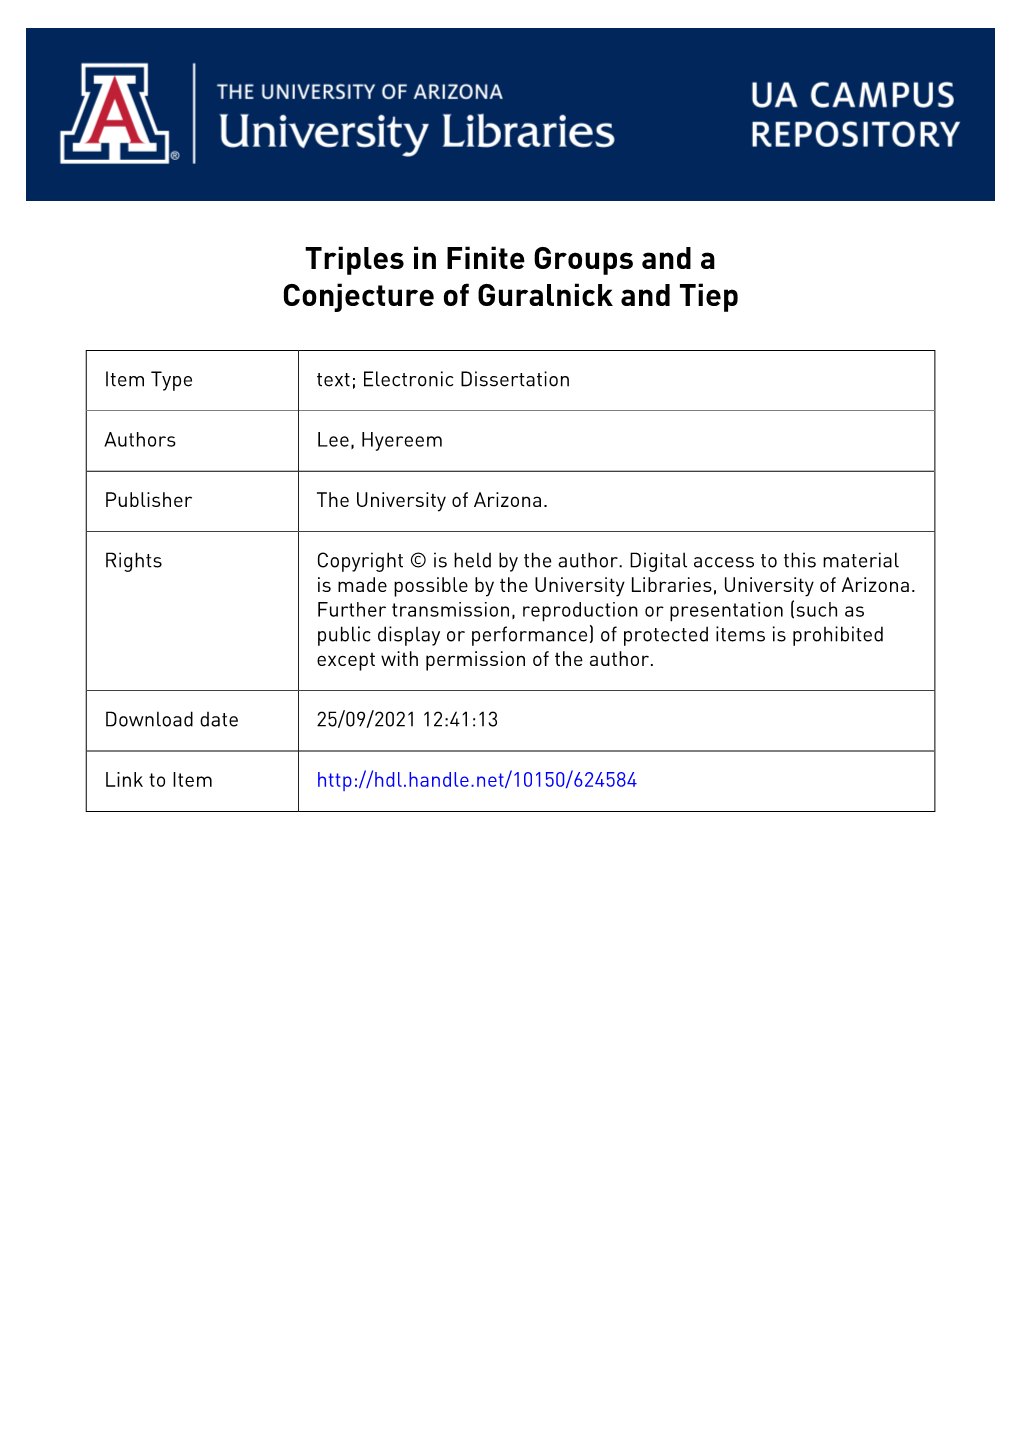 Triples in Finite Groups and a Conjecture of Guralnick and Tiep